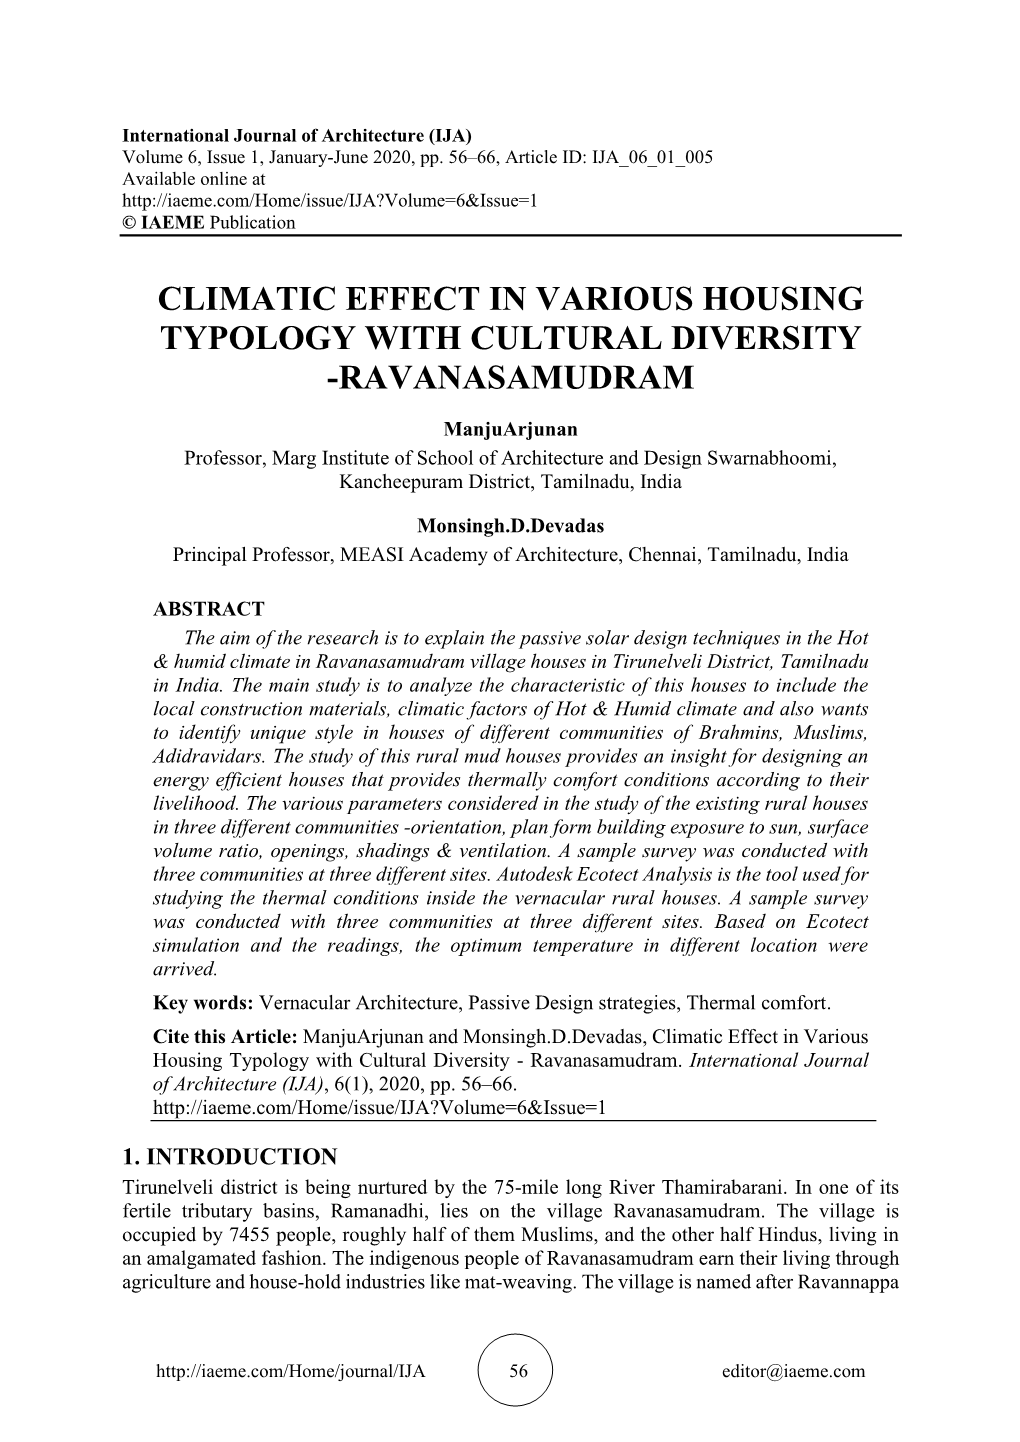 Climatic Effect in Various Housing Typology with Cultural Diversity -Ravanasamudram